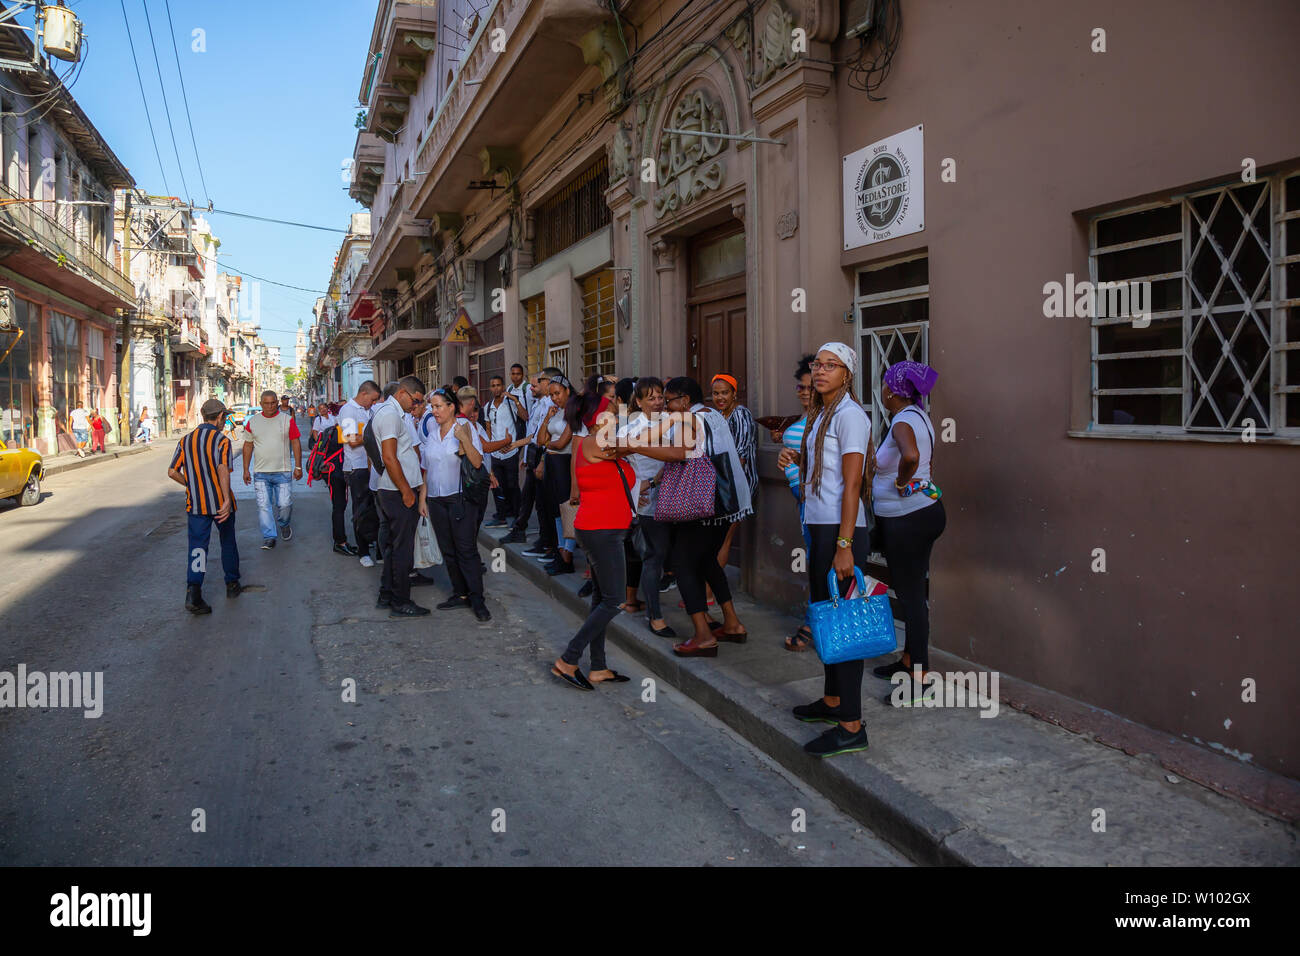 Havana, Cuba - May 13, 2019: Crowd of Cuban People waiting in line for the food in the streets of the Old Havana City during a bright sunny morning. Stock Photo